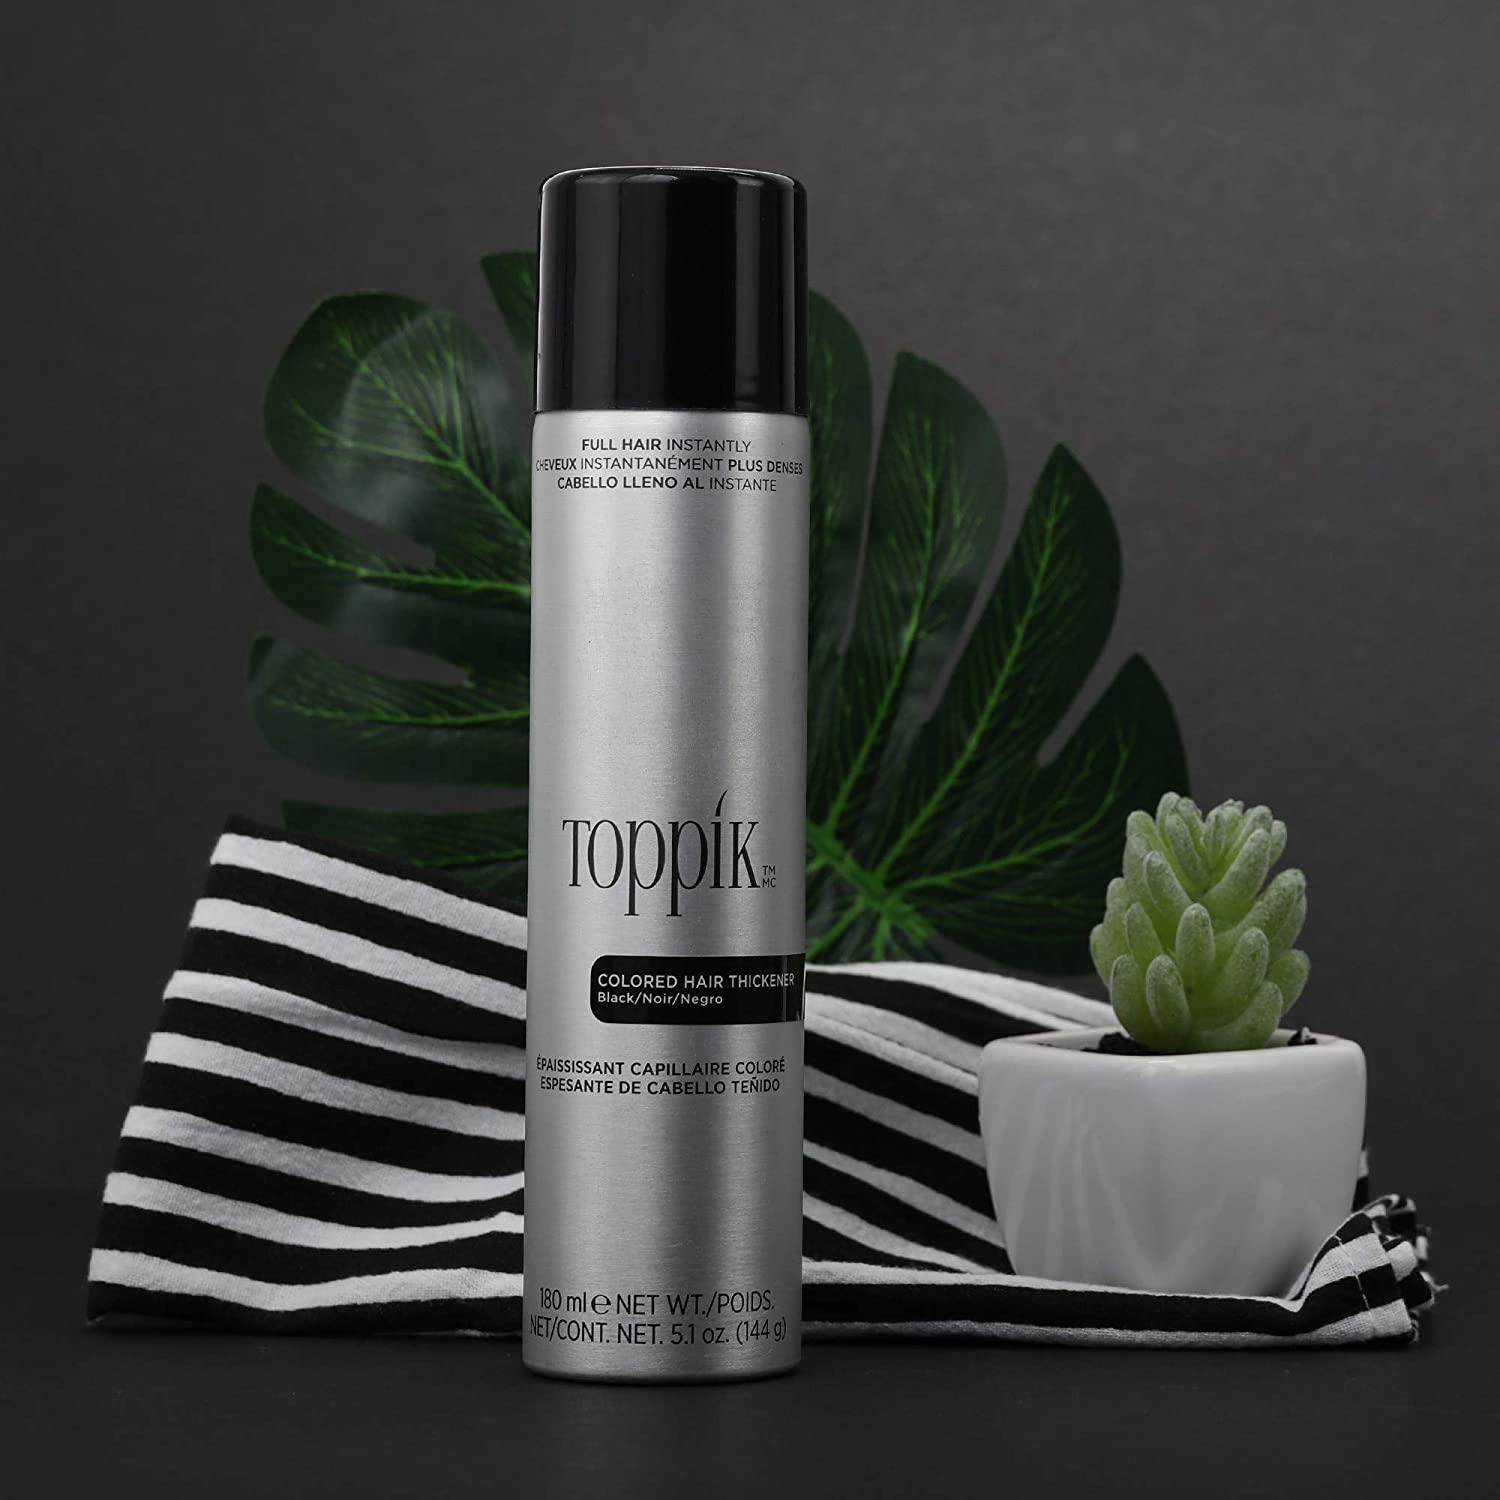 Toppik Colored Hair Thickener, Dark Brown Hair Spray for Thinning